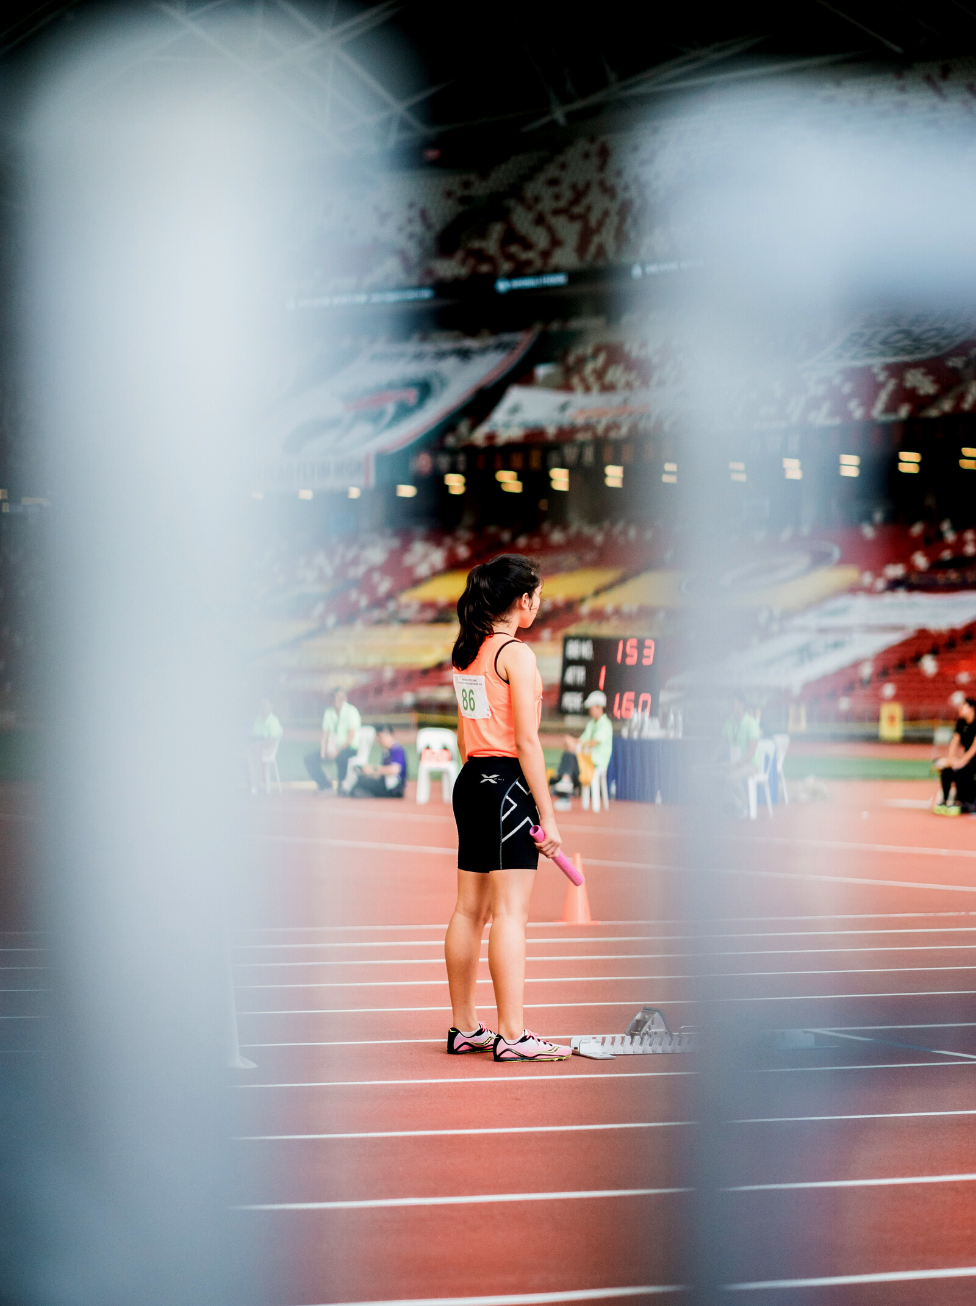 female athlete on a track about to start a race